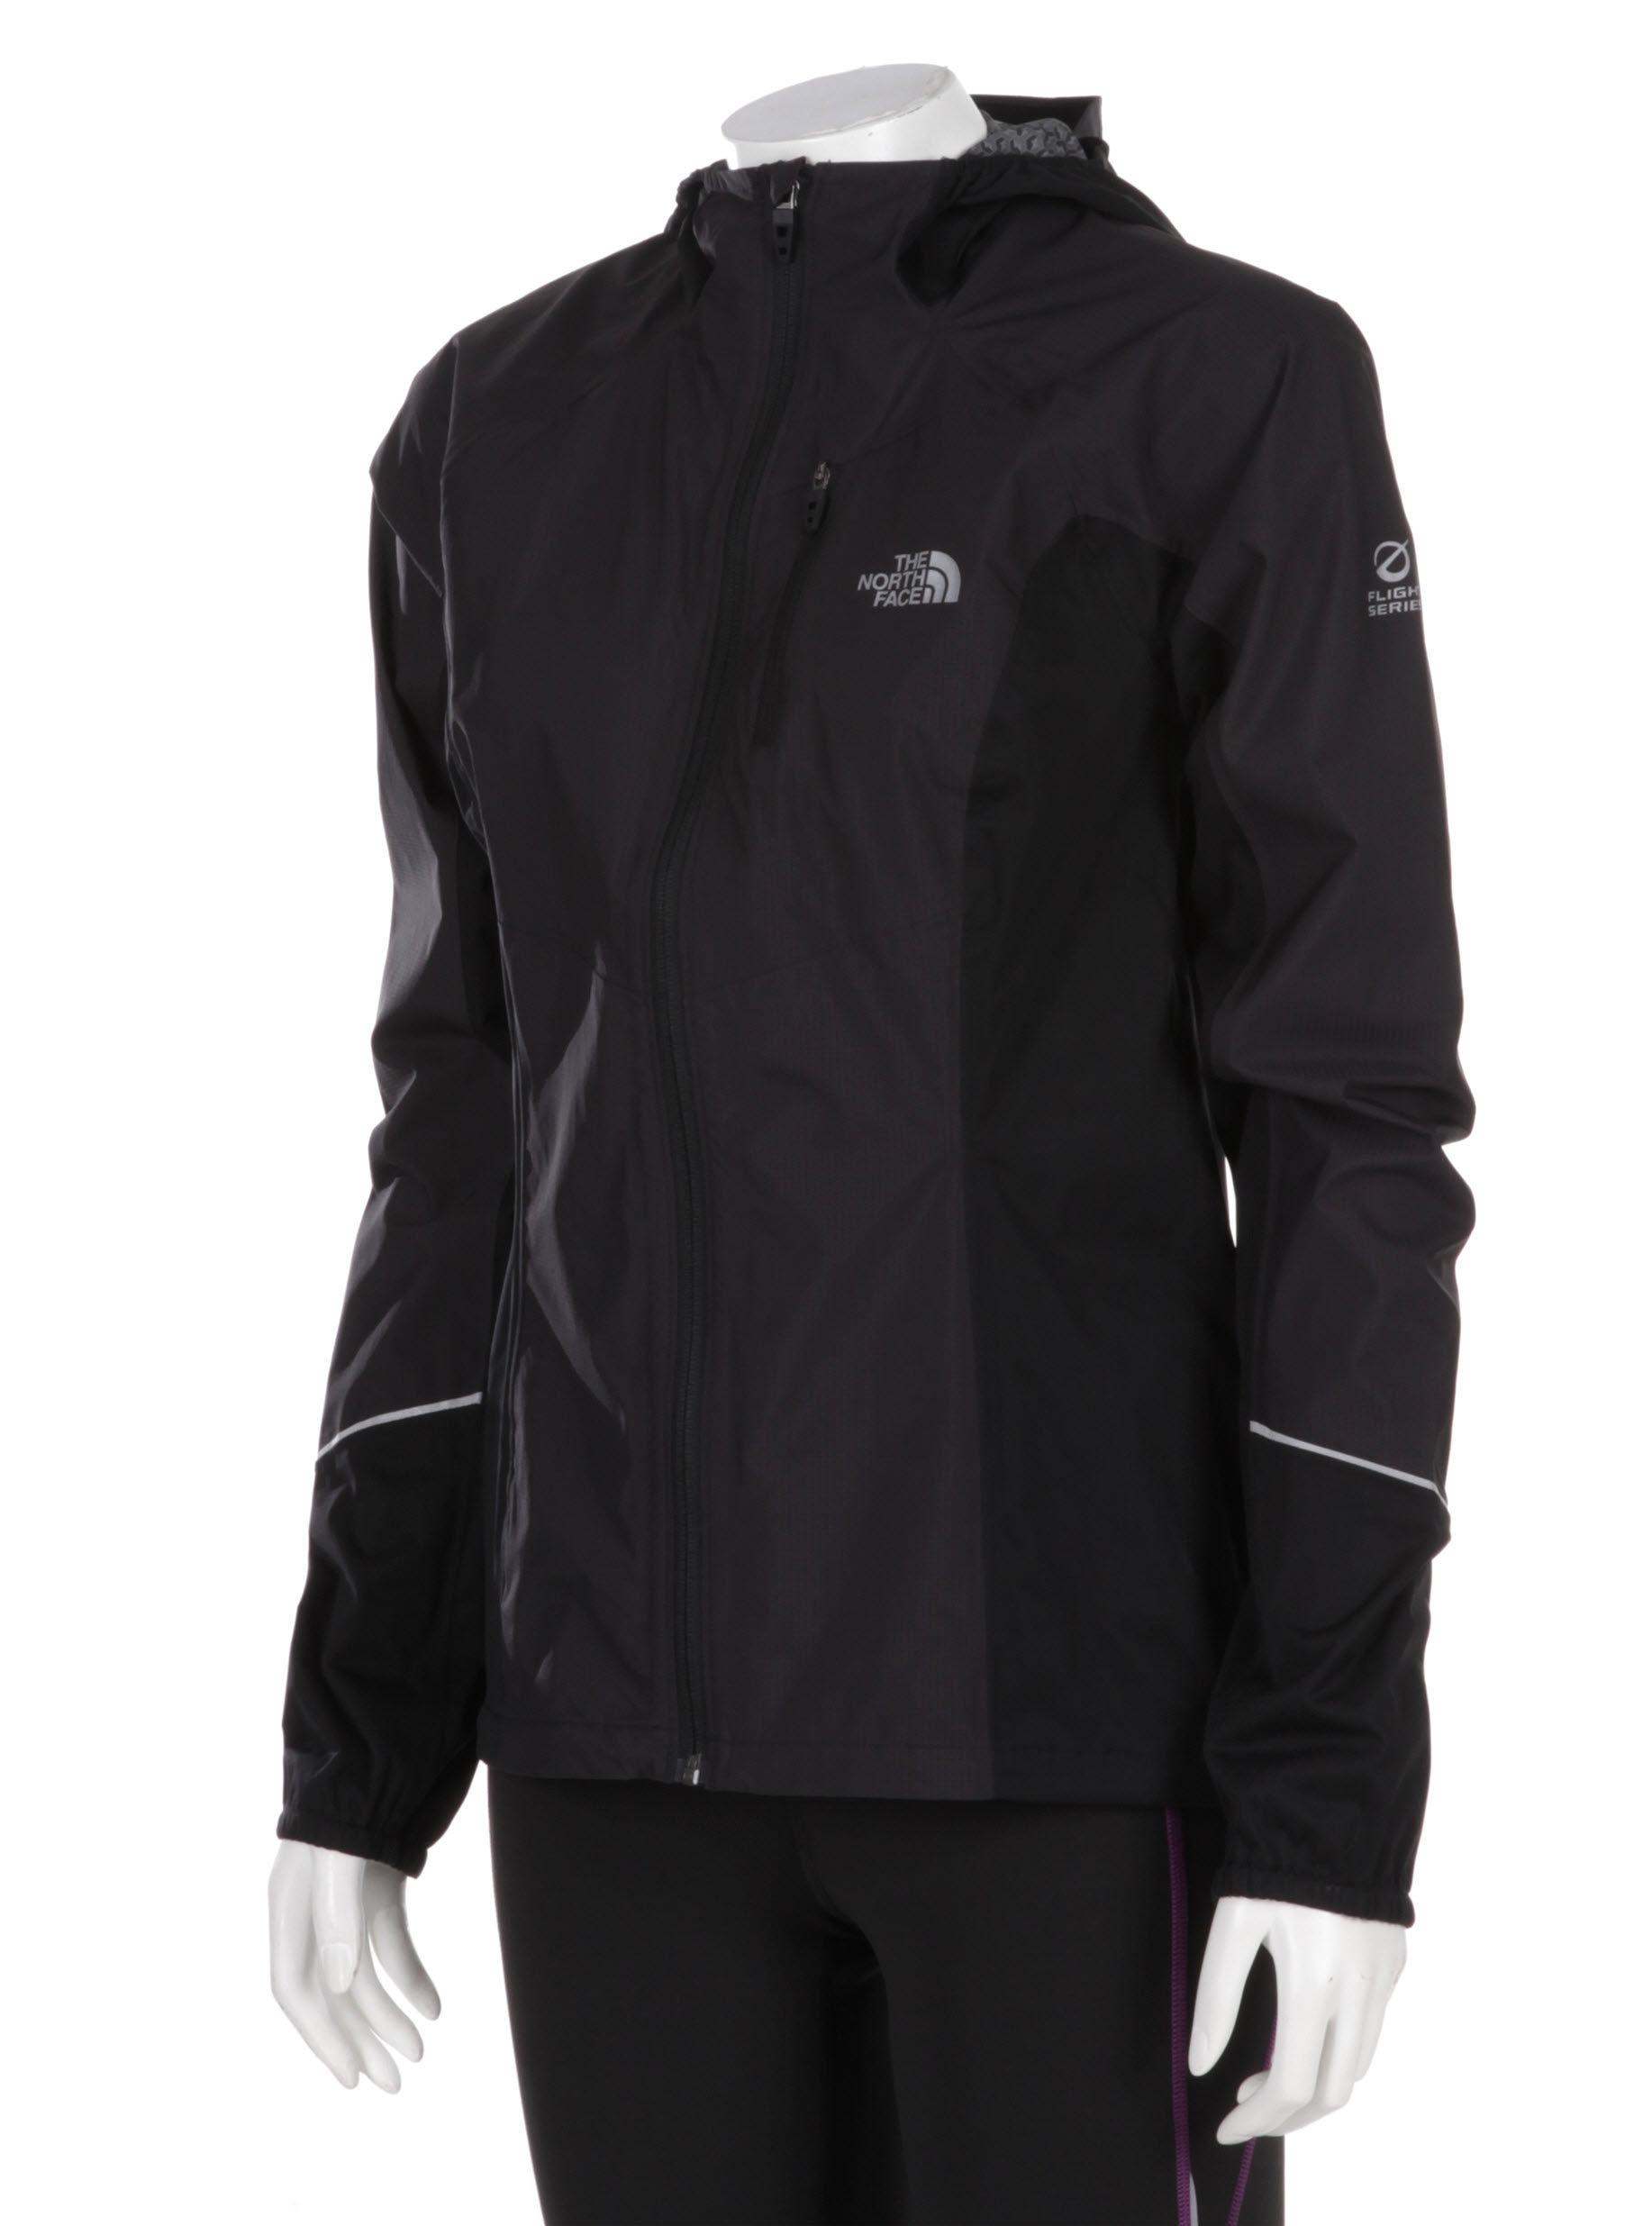 Foto Chaqueta para mujer The North Face - AK Storm Trail - Large TNF Black foto 115710